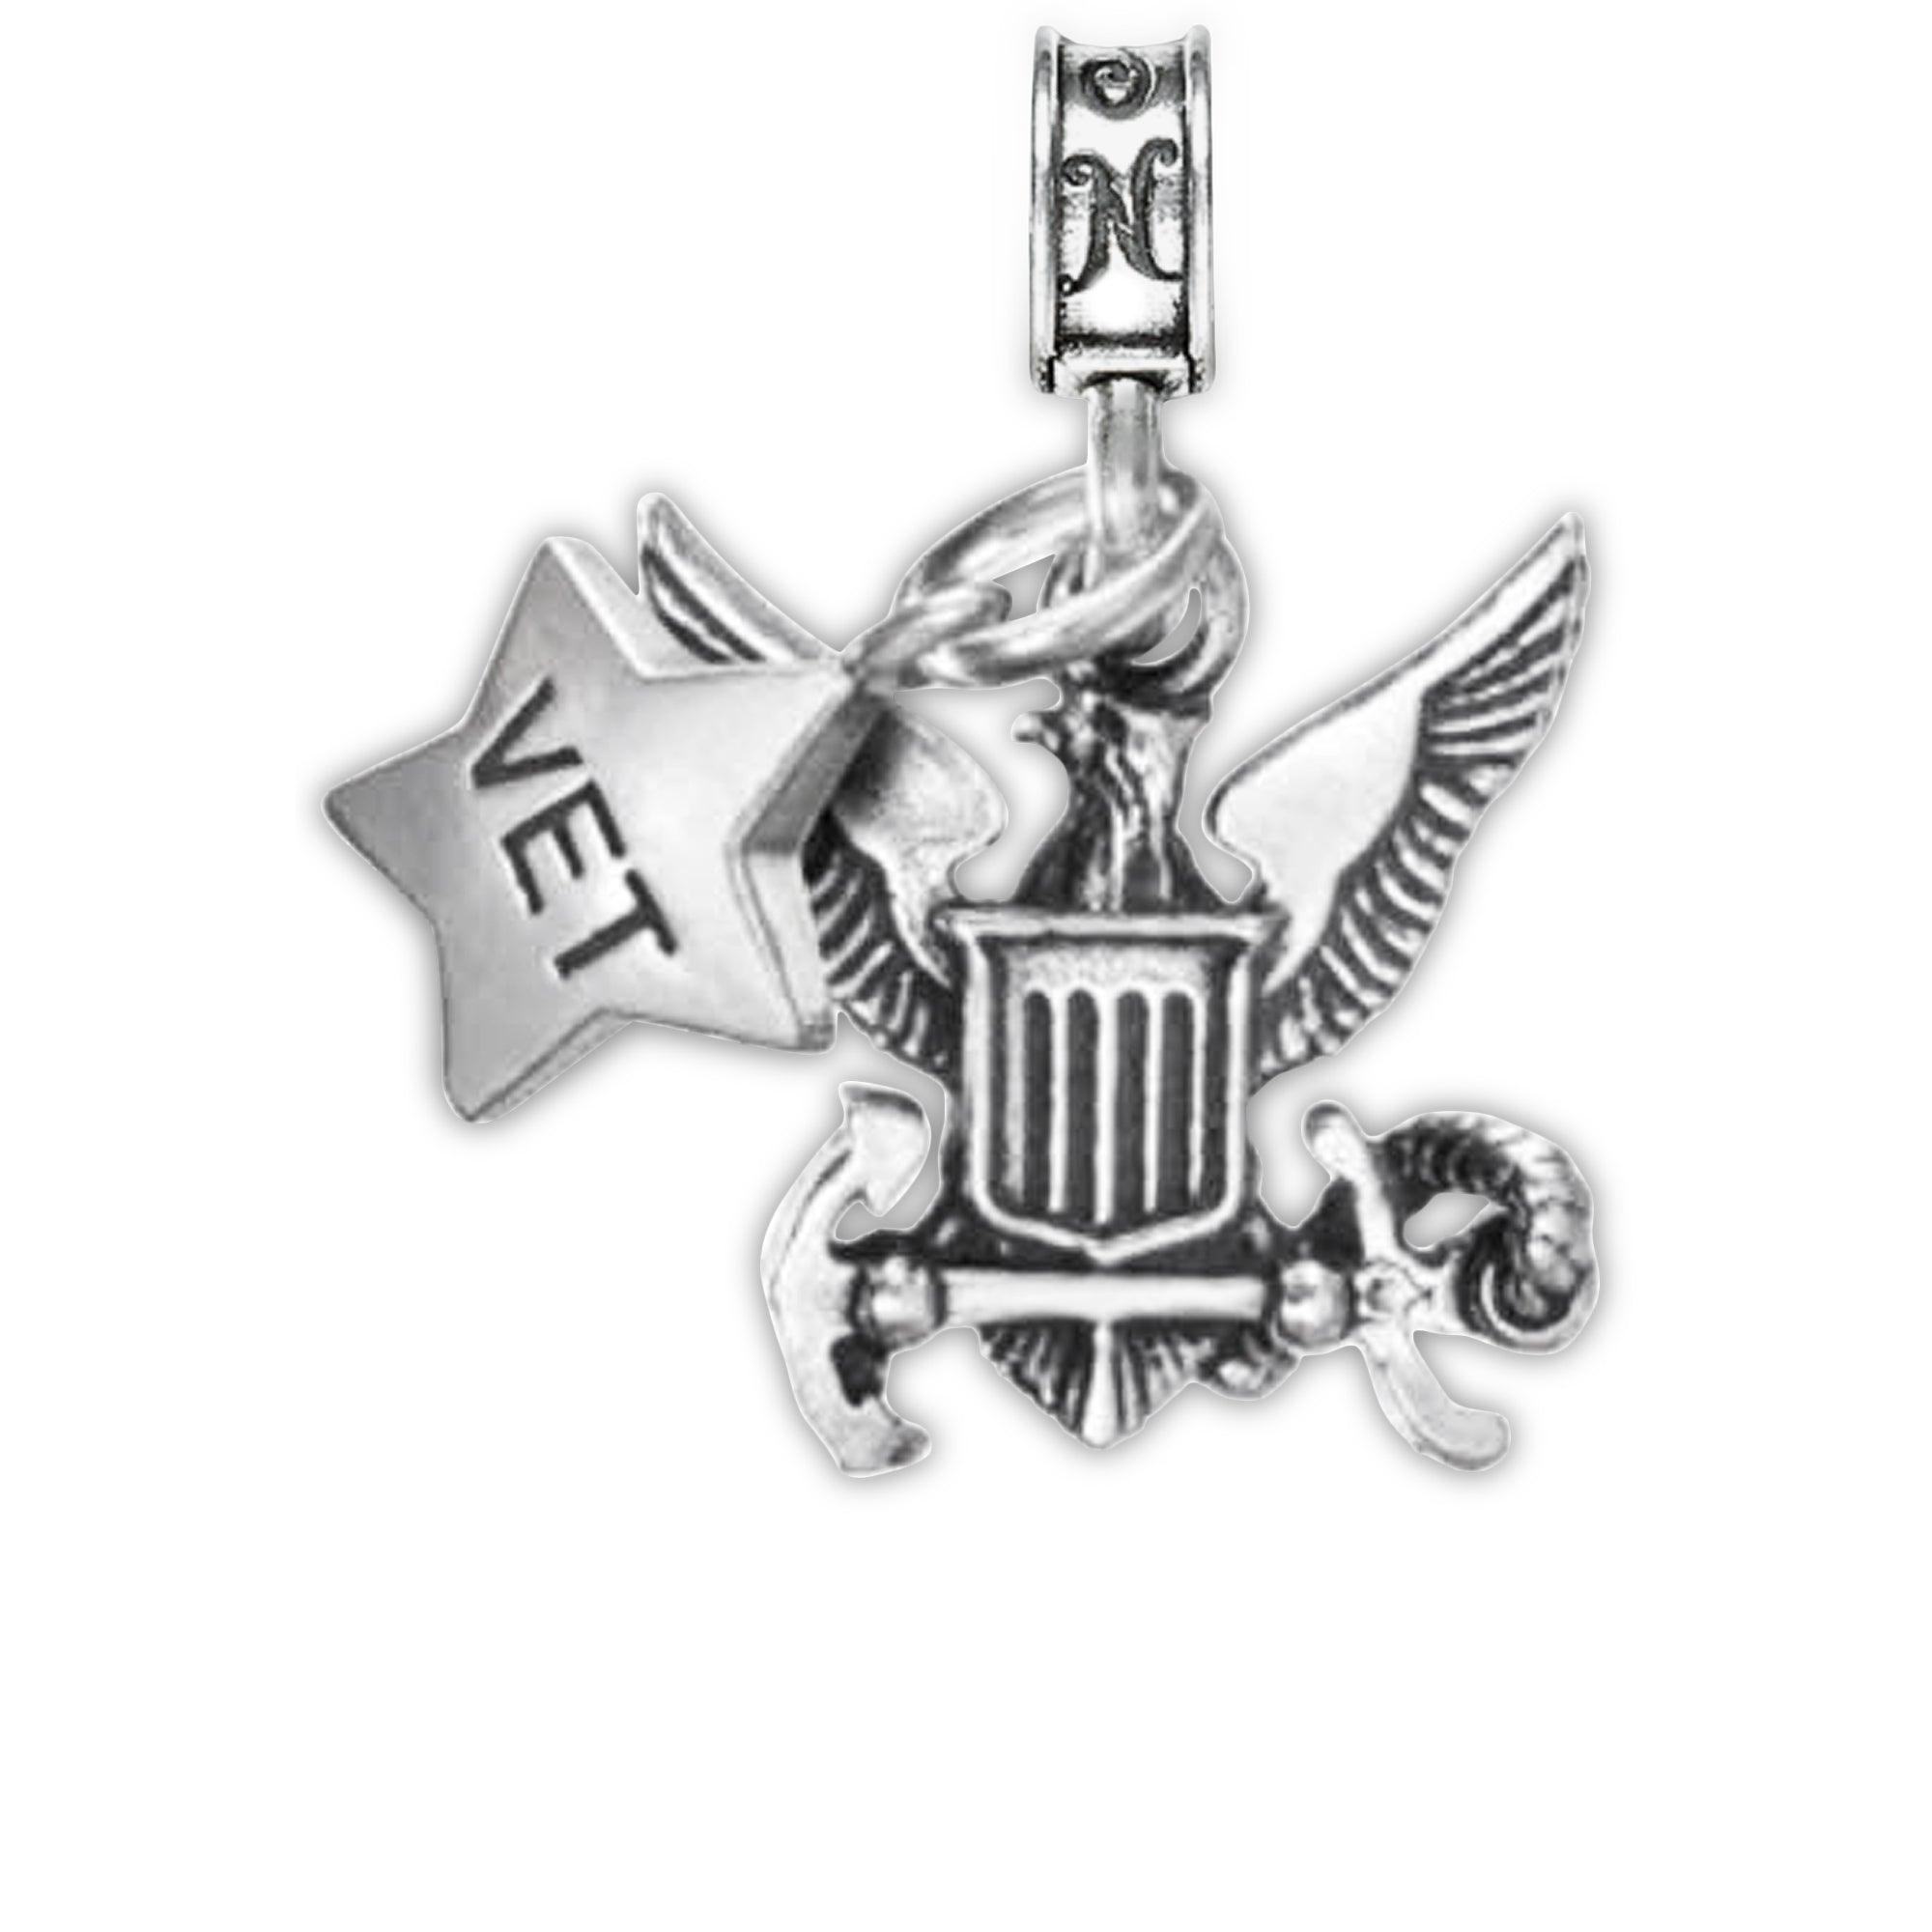 Military Jewelry, Military Charms, Military Gifts, USAF, United States Air Force, Navy Emblem, Navy Veteran